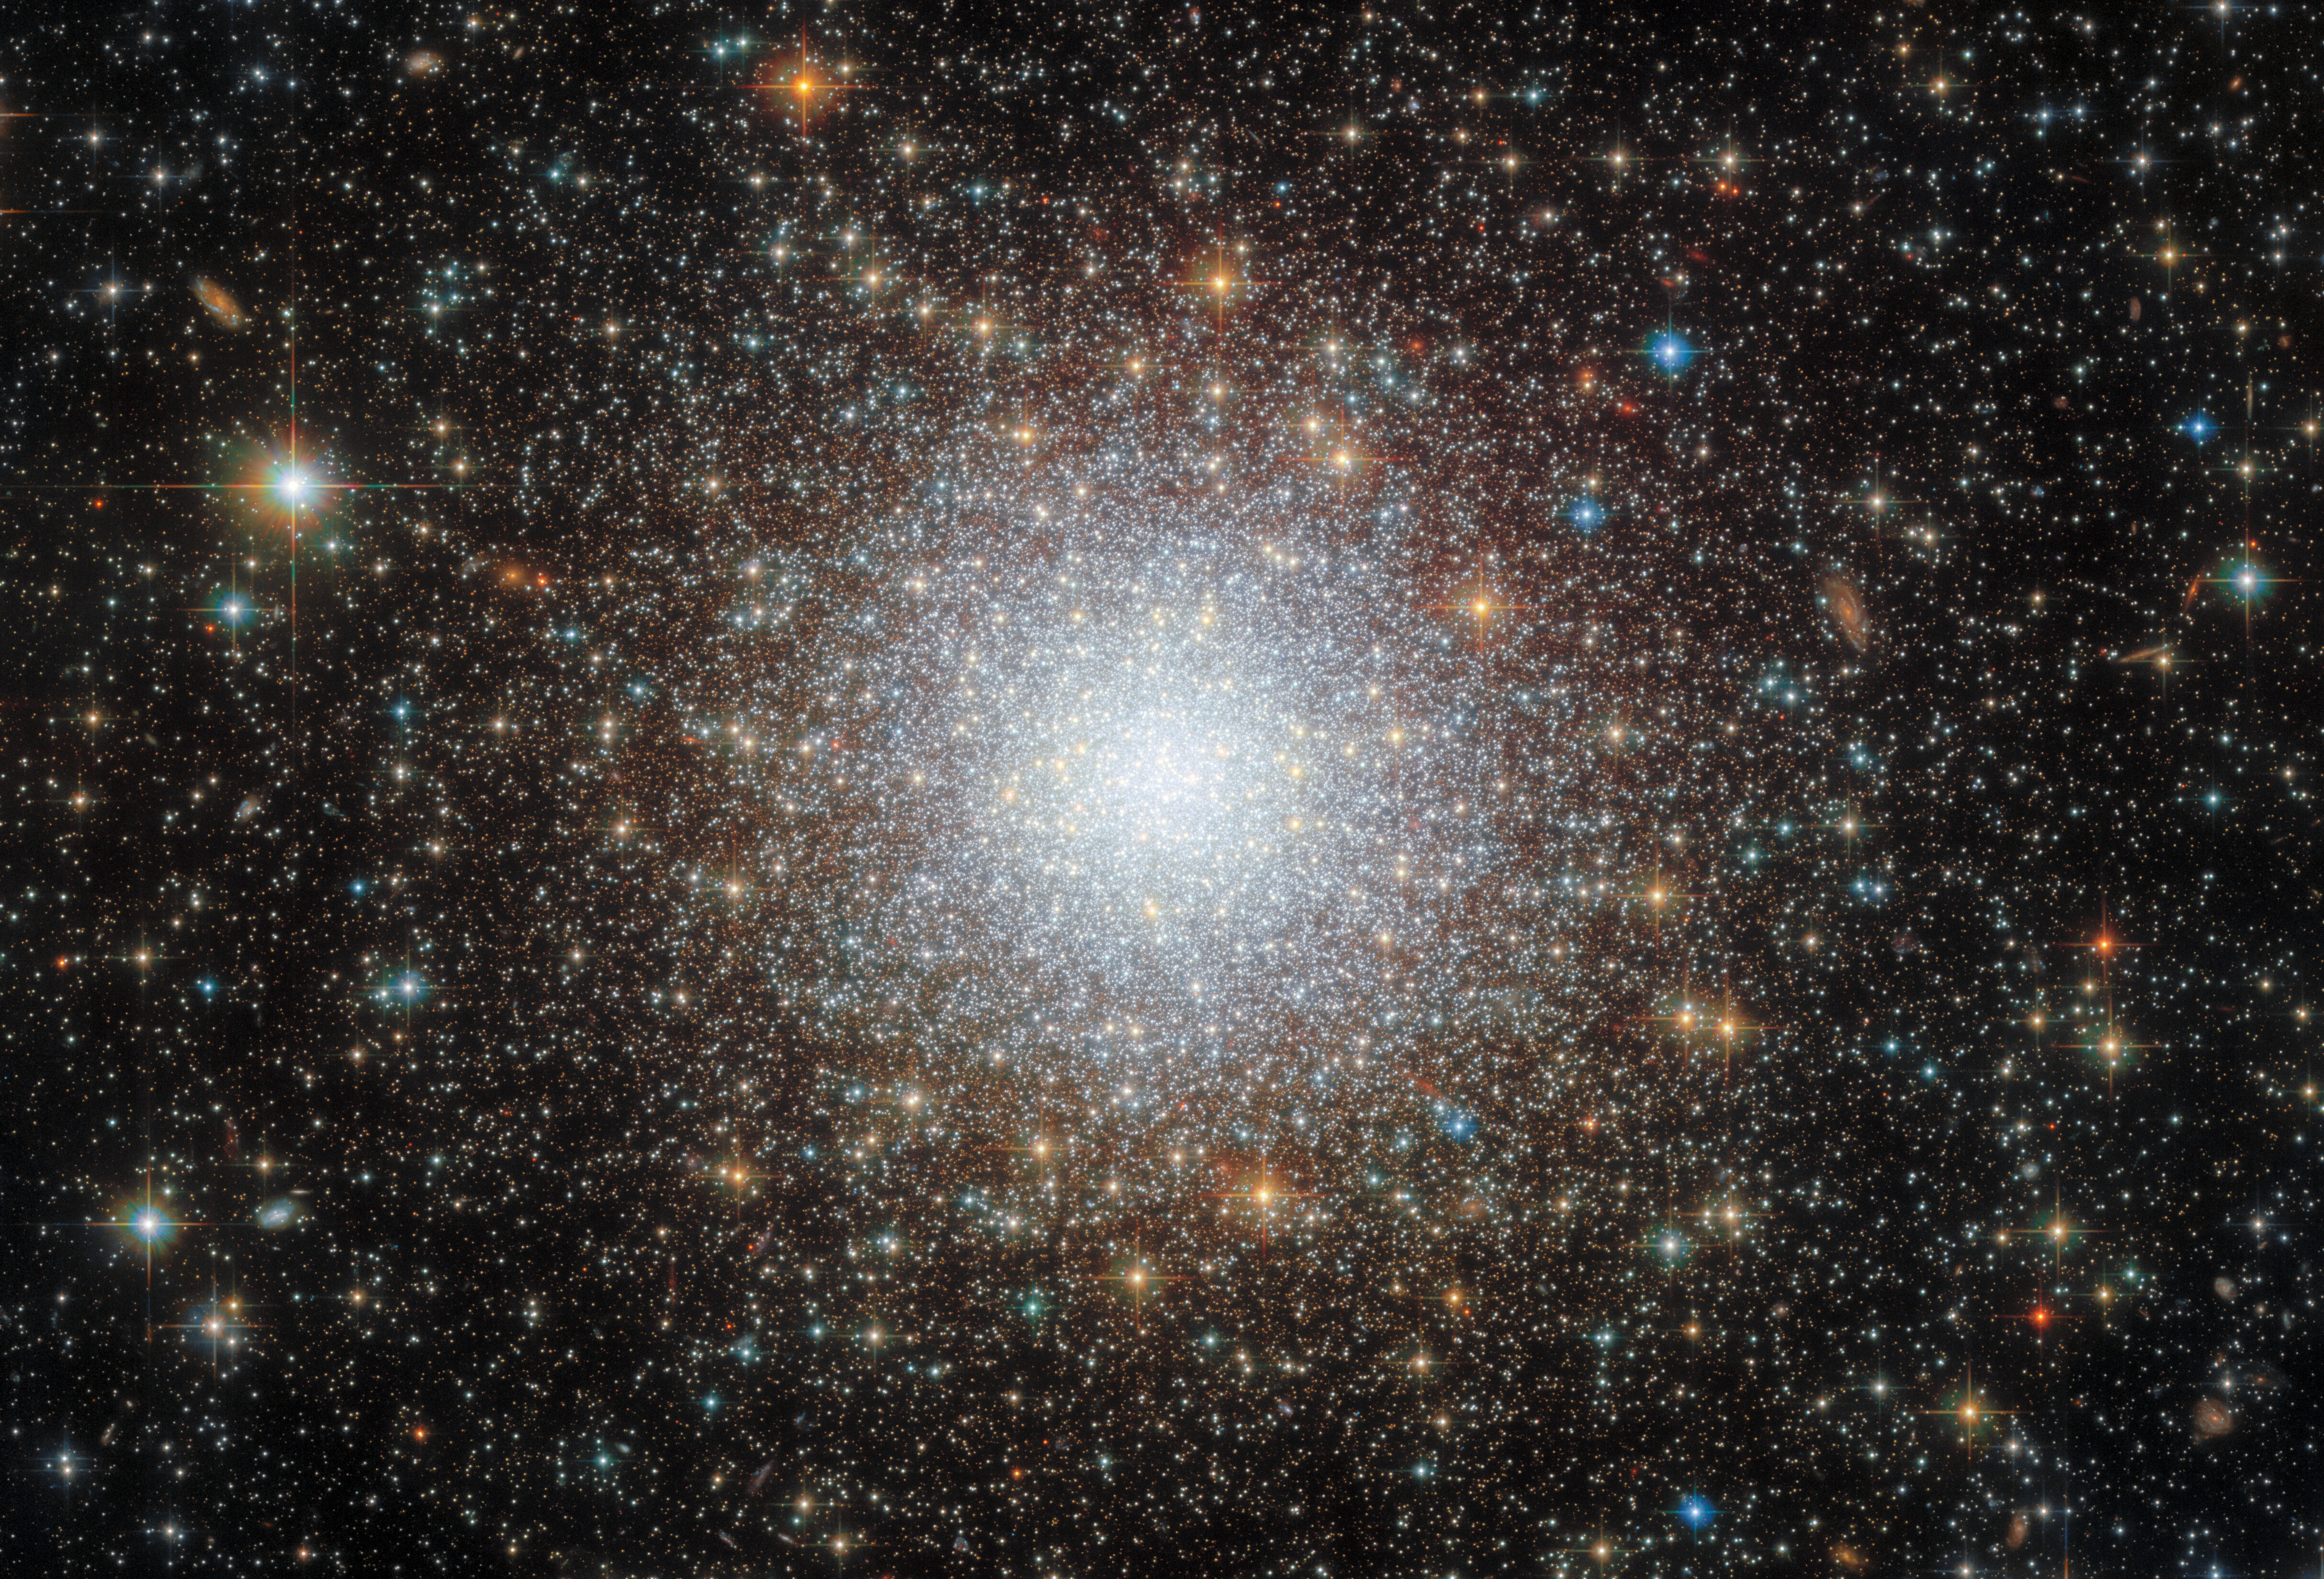 A dense cluster of stars. It is brightest and most crowded in the center, where the stars are mostly a cool white color. Moving out towards the edges the stars become more spread out and reddish until a noticeable ‘edge’ to the cluster is reached. Beyond that edge there are still many stars, more disorganized and seen on a black background. Some stars appear to be in front of the cluster.